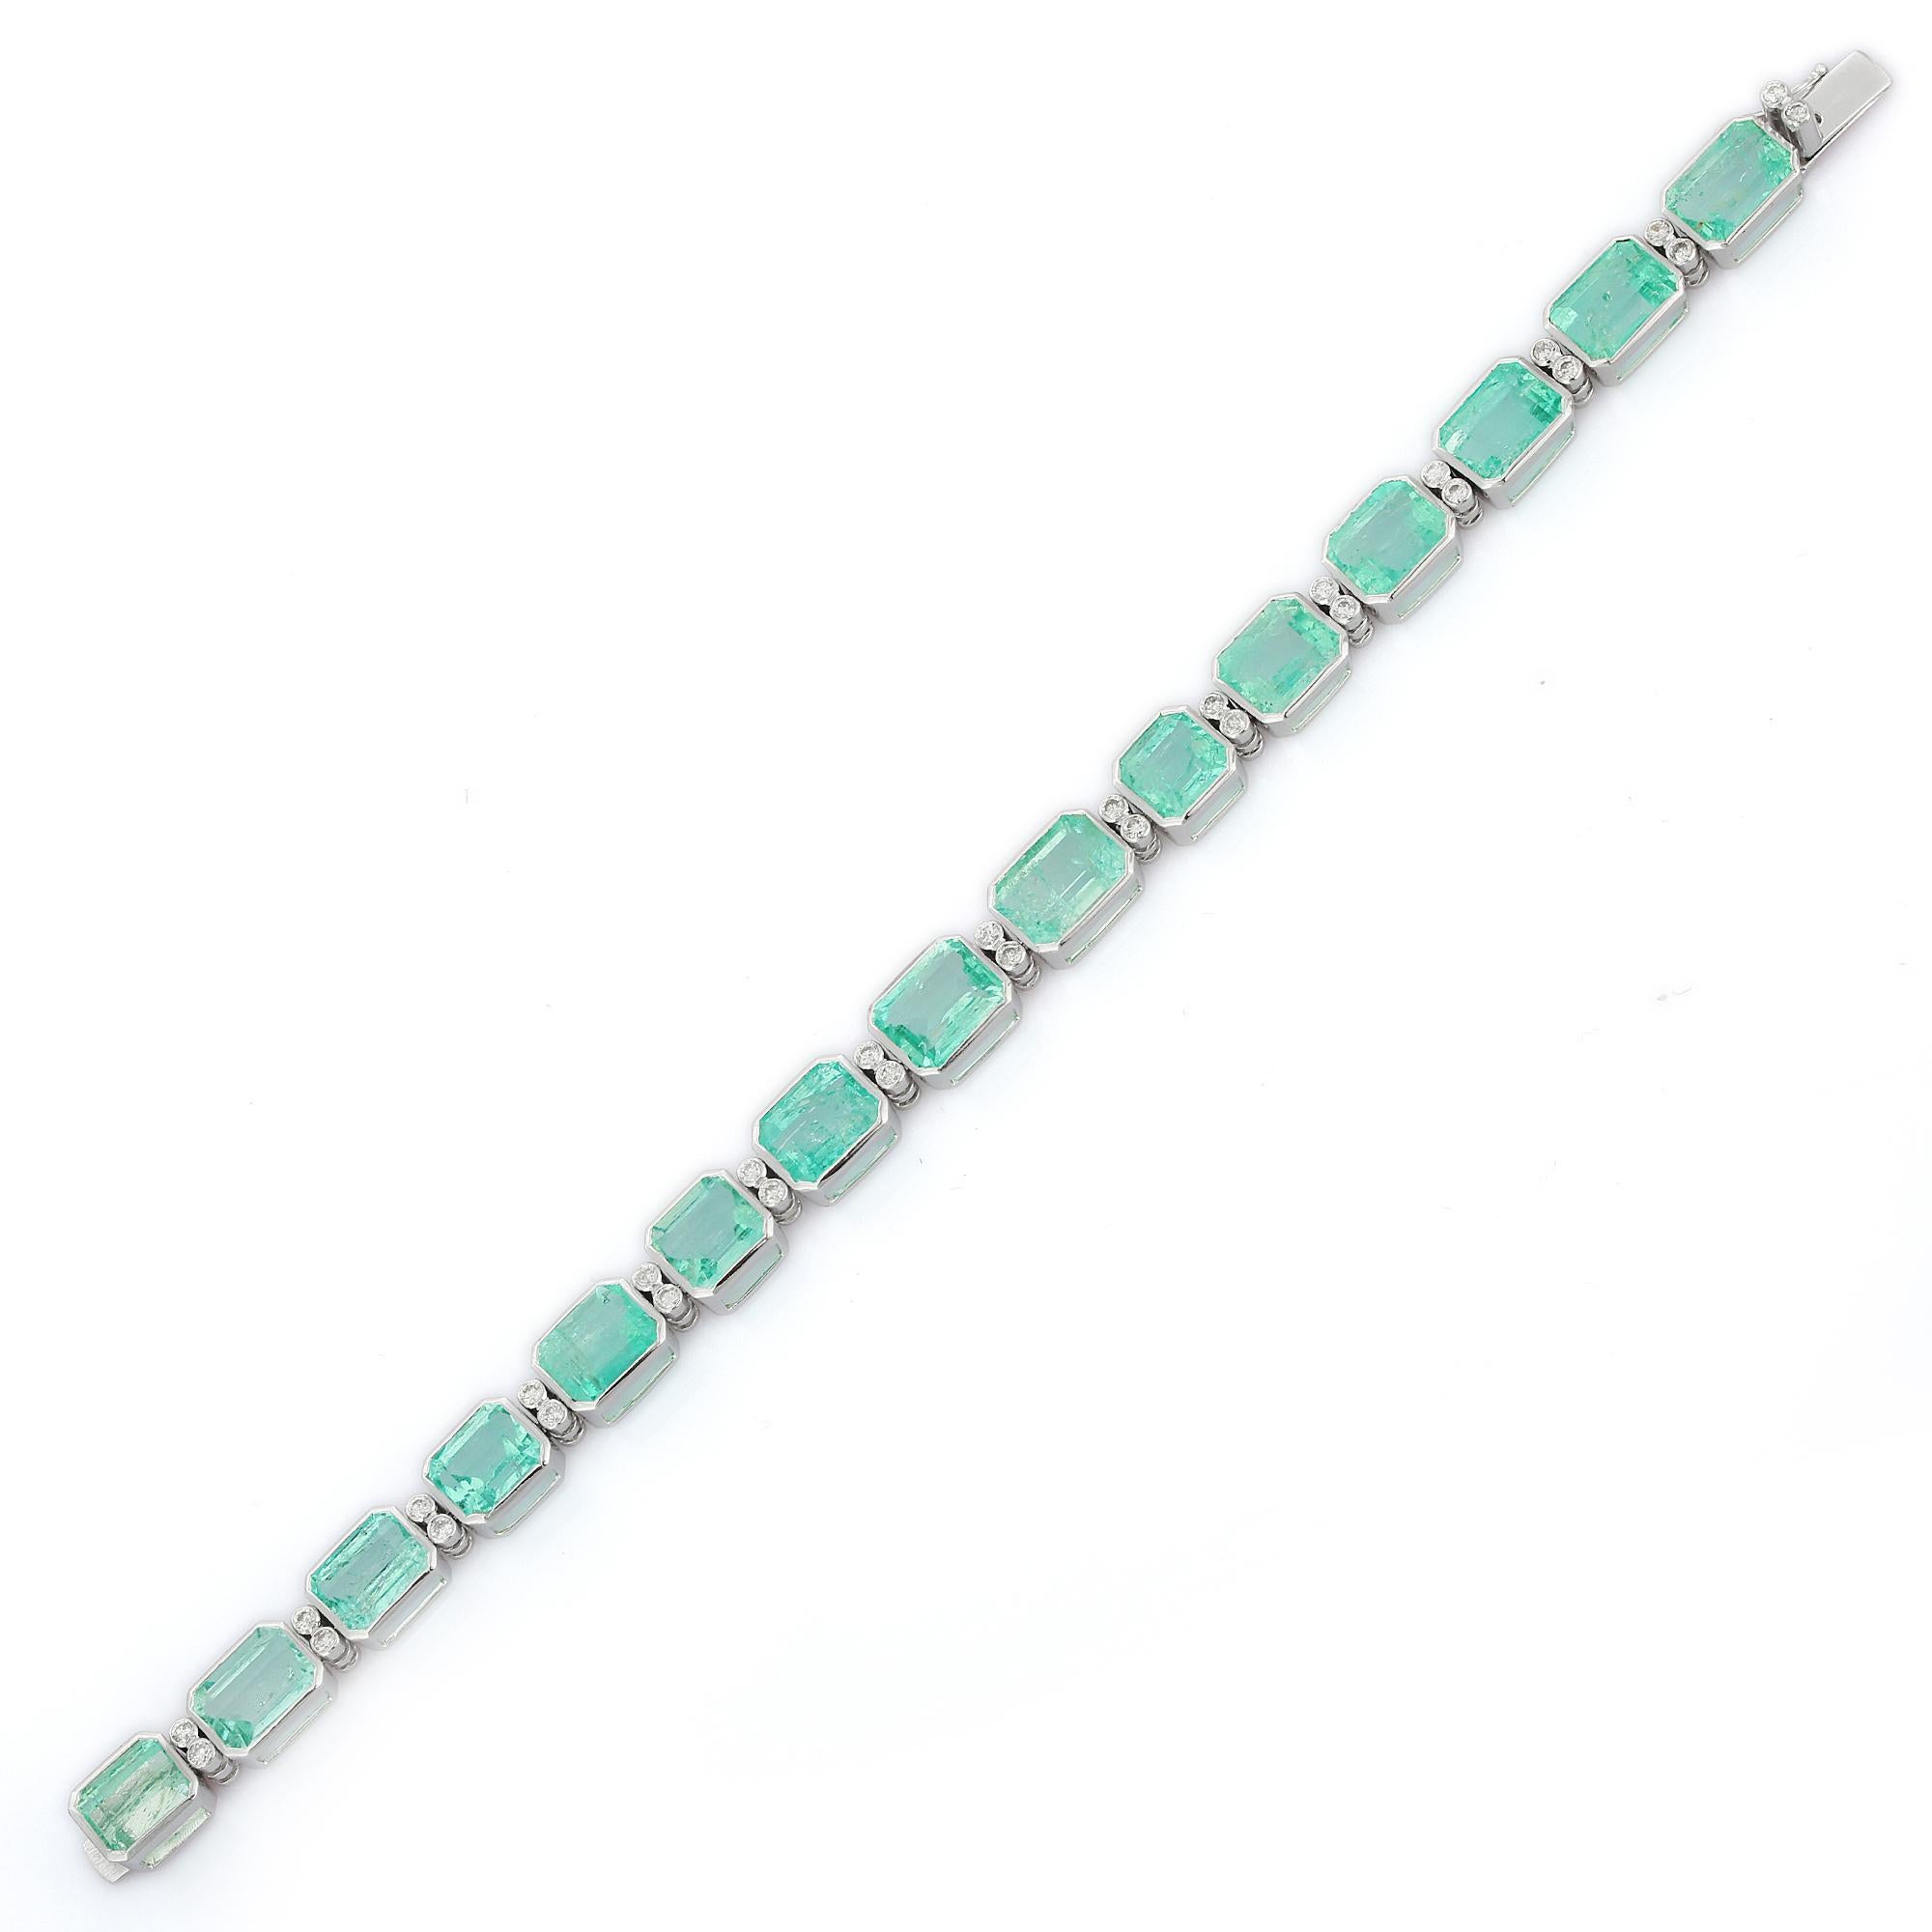 33.58 Carat Octagon Cut Emerald Tennis Bracelet with Diamonds in 18K White Gold For Sale 1